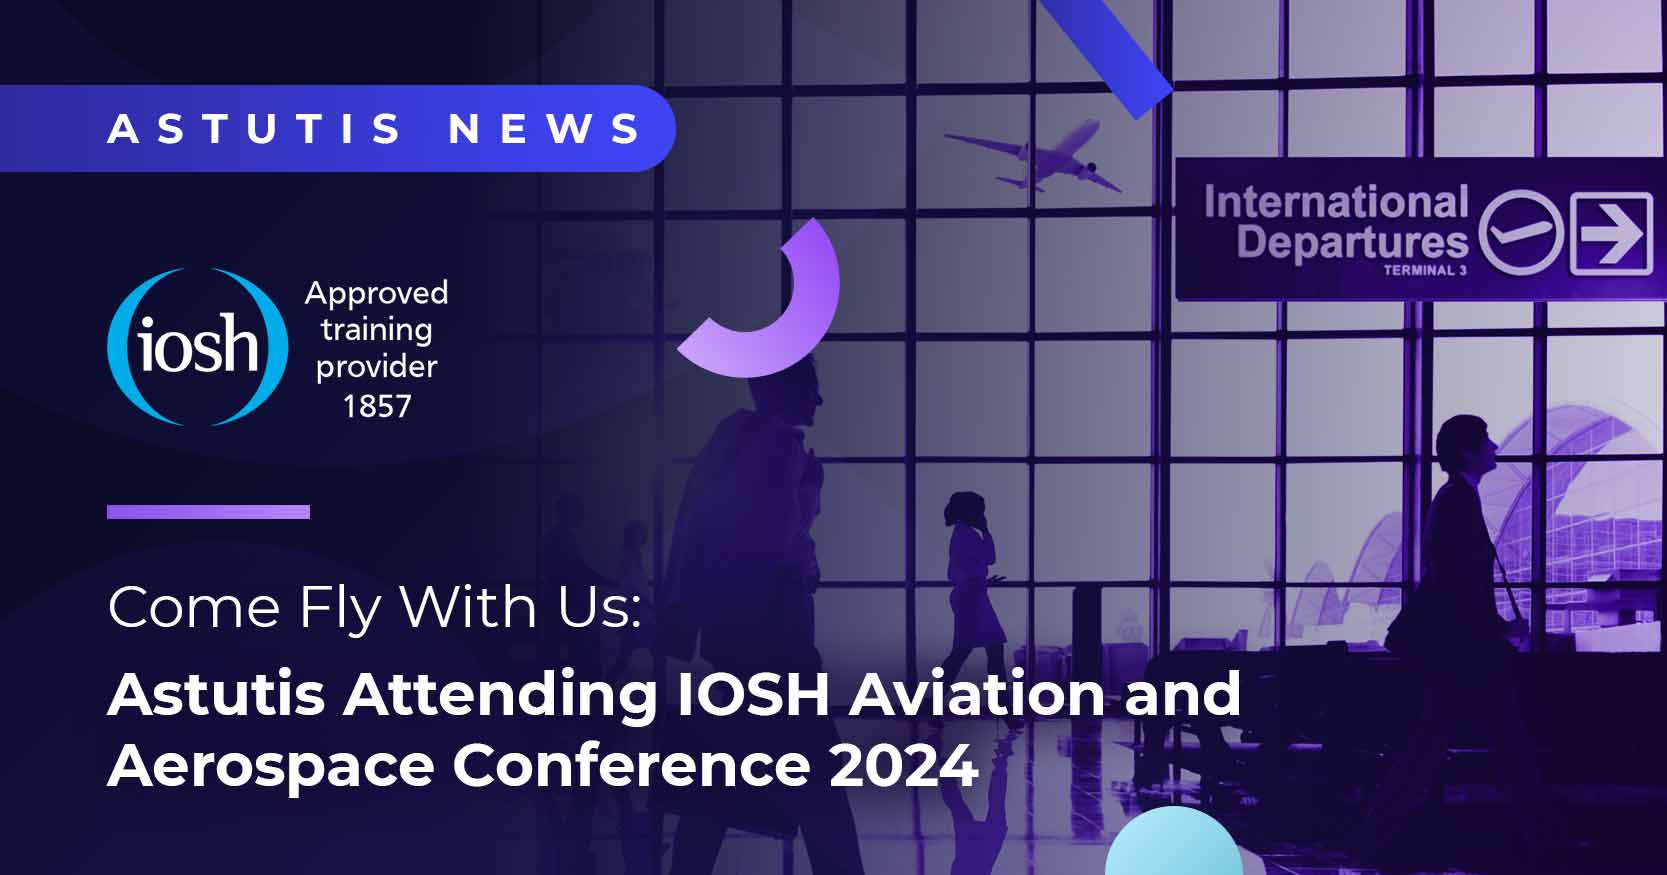 Come Fly With Us: Astutis Attending IOSH Aviation and Aerospace Conference 2024 Image